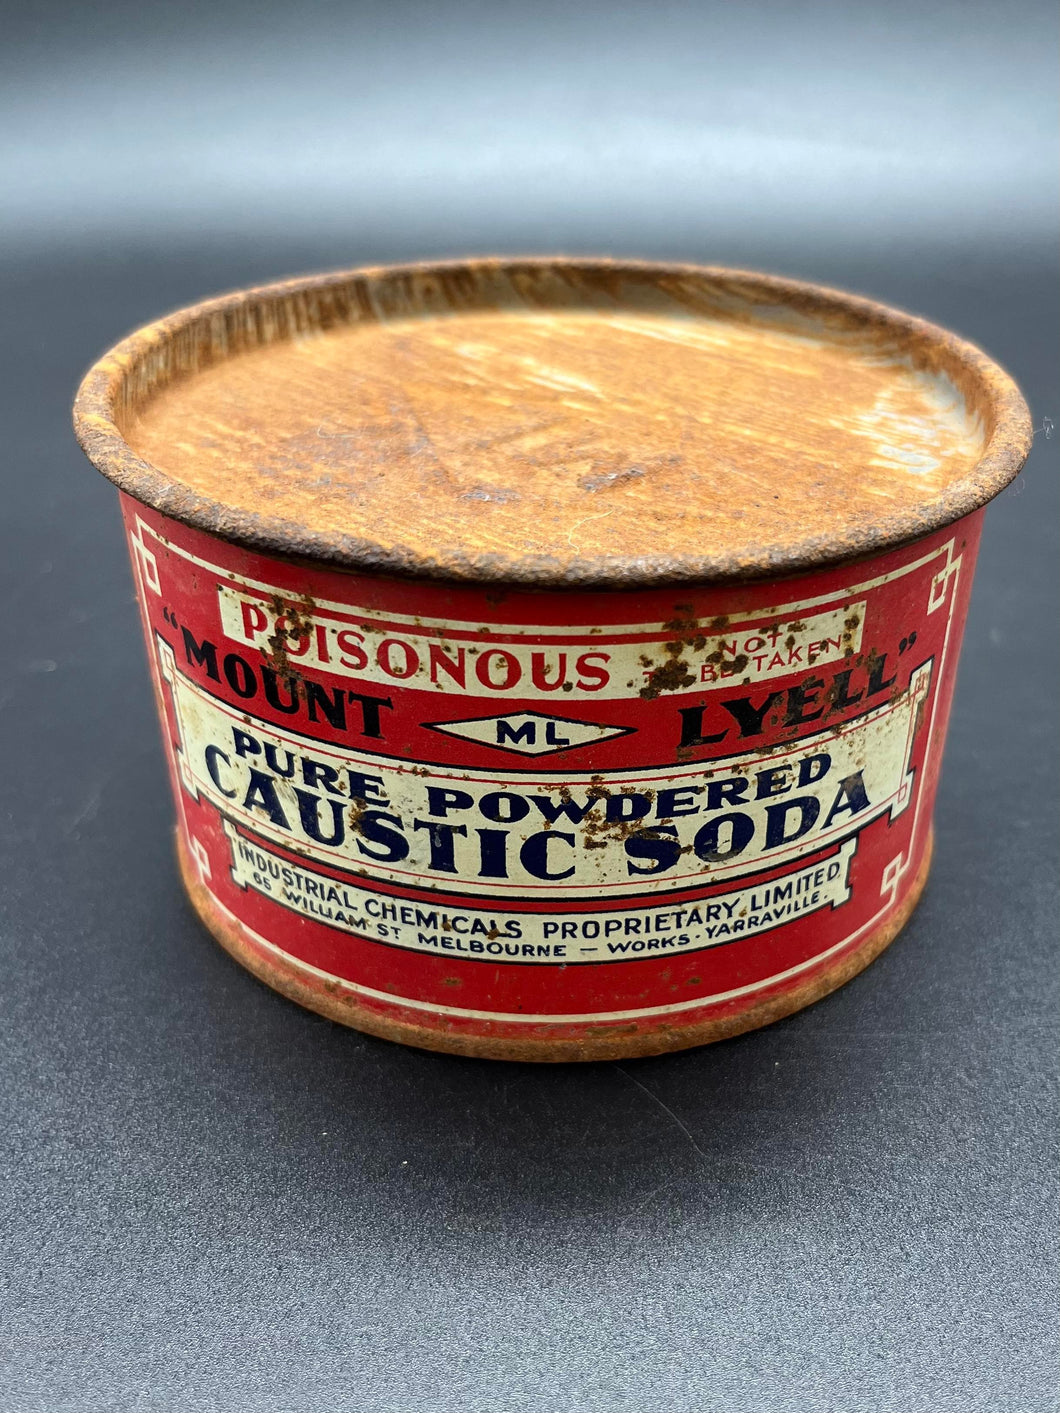 Vintage Mount Lyell Pure Powdered Caustic Soda Tin - Melbourne